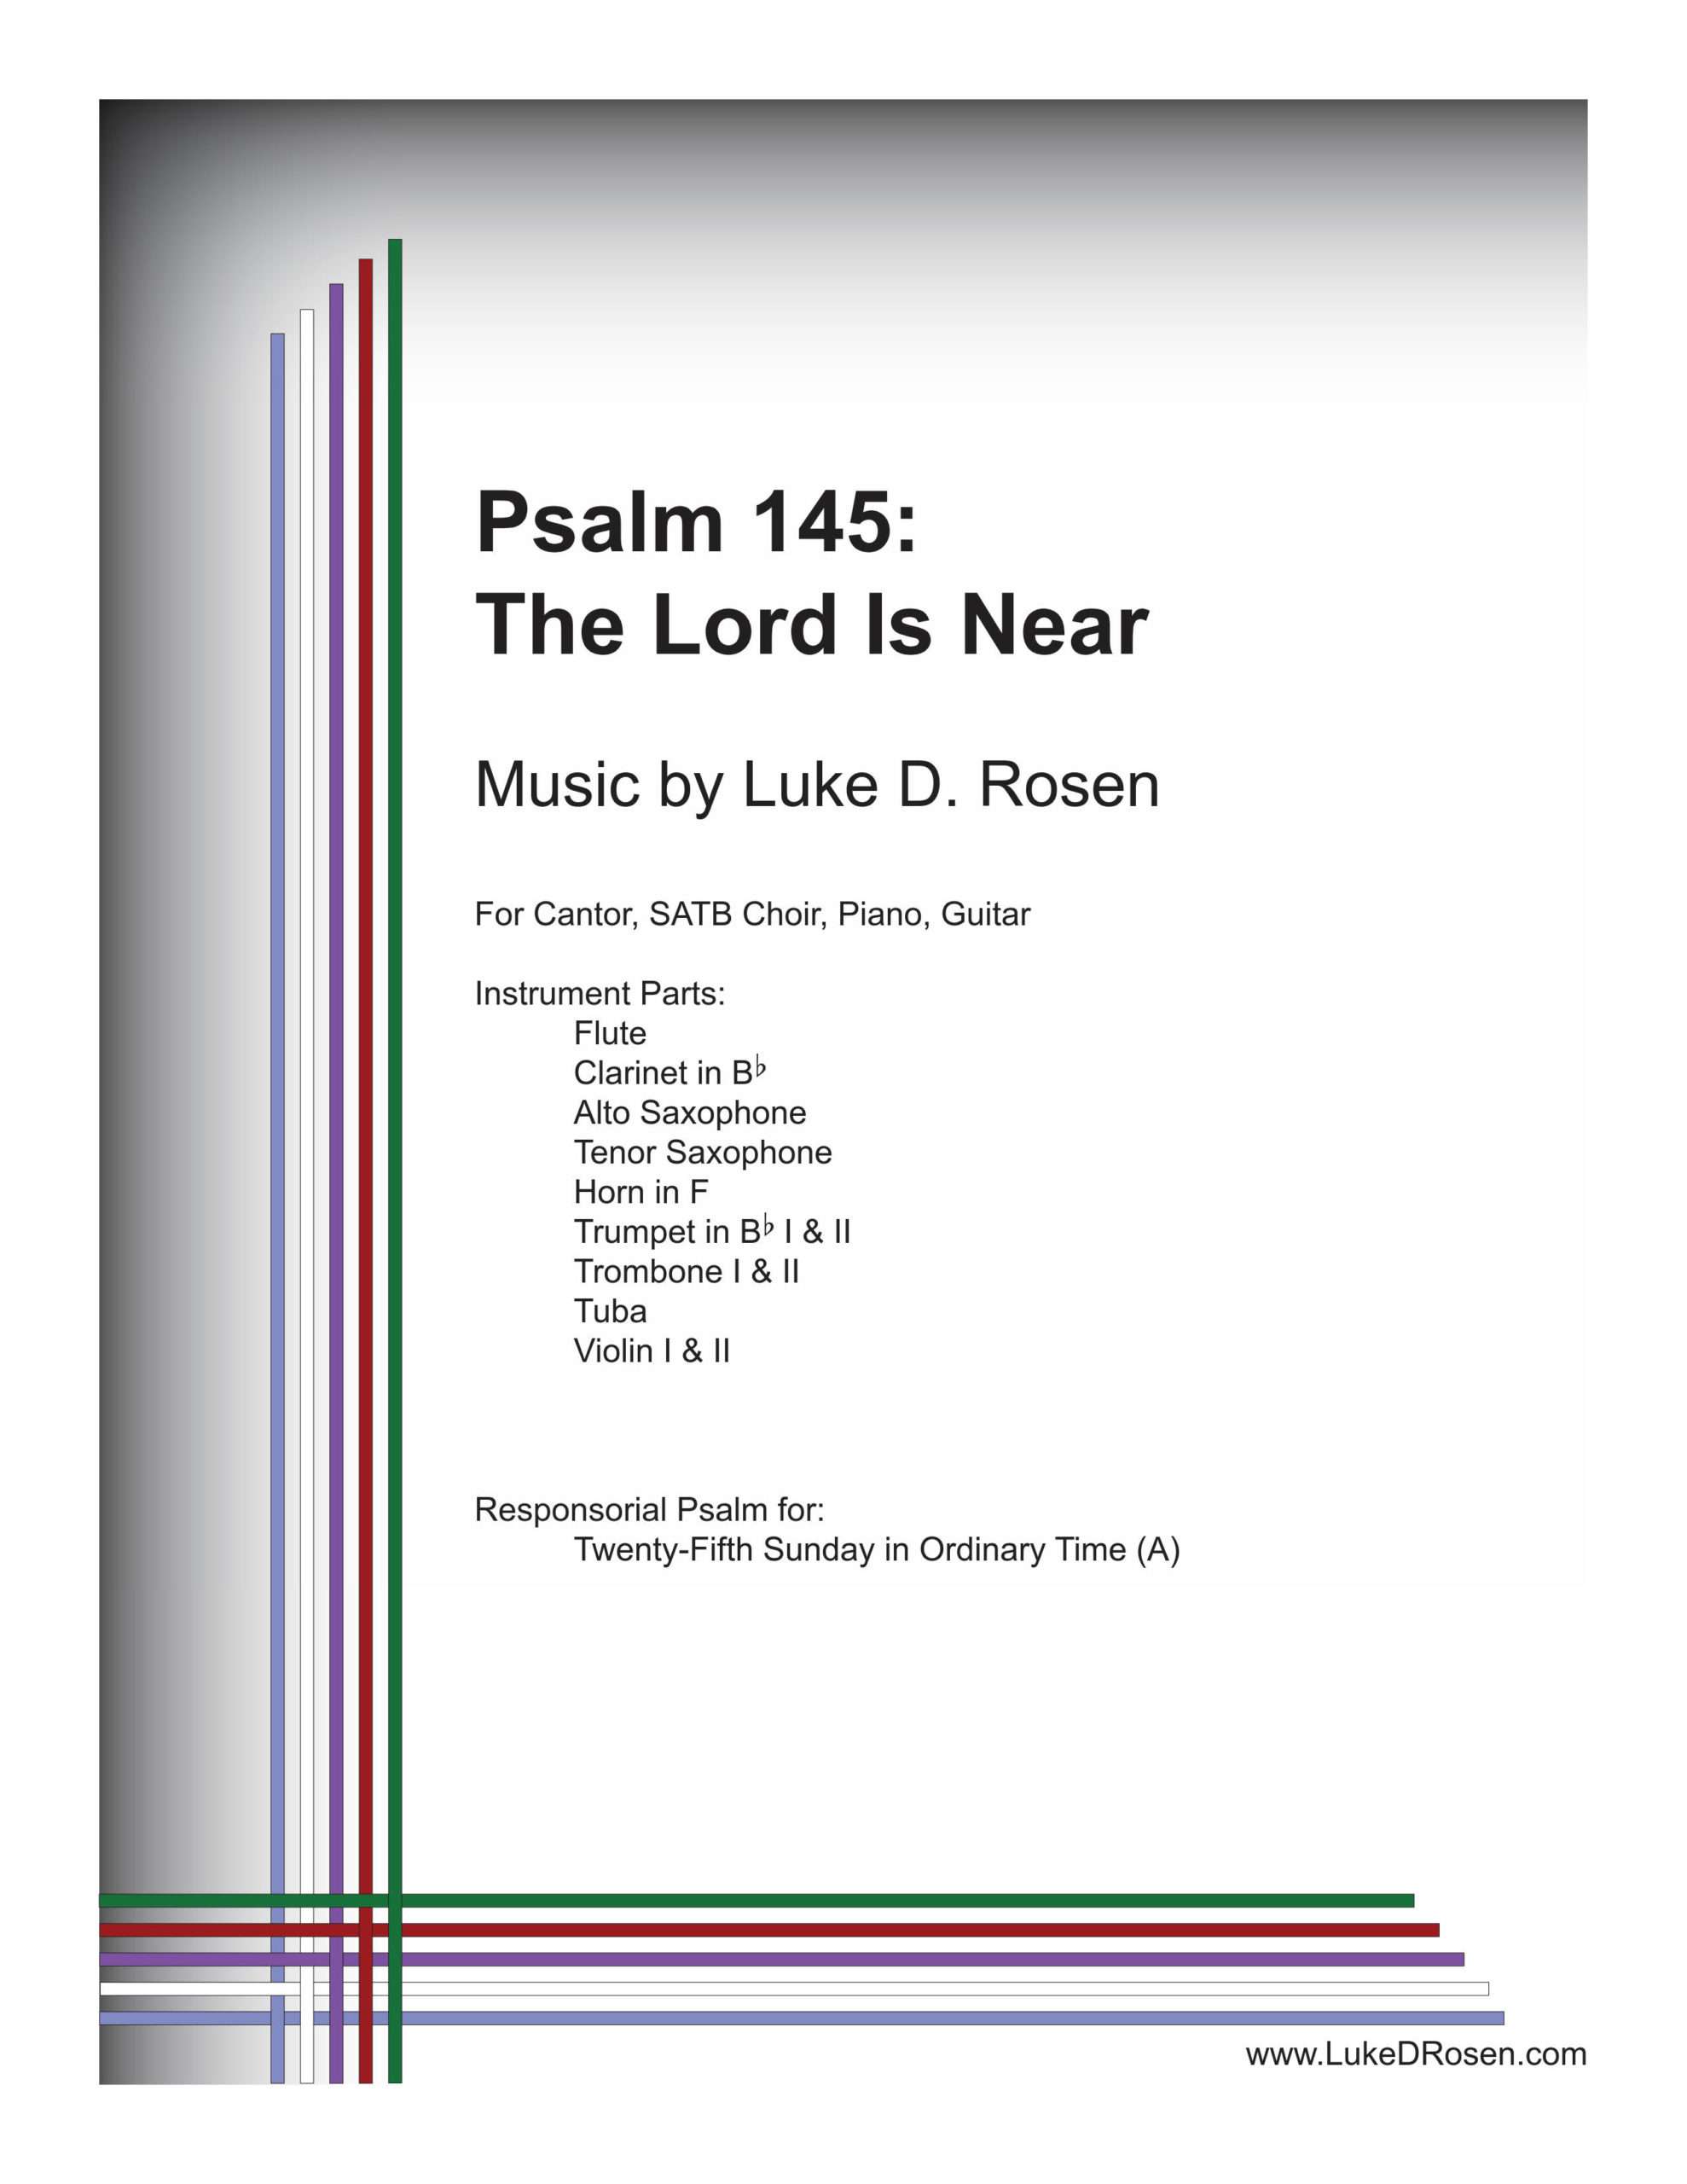 Psalm 145 – The Lord Is Near (Rosen)